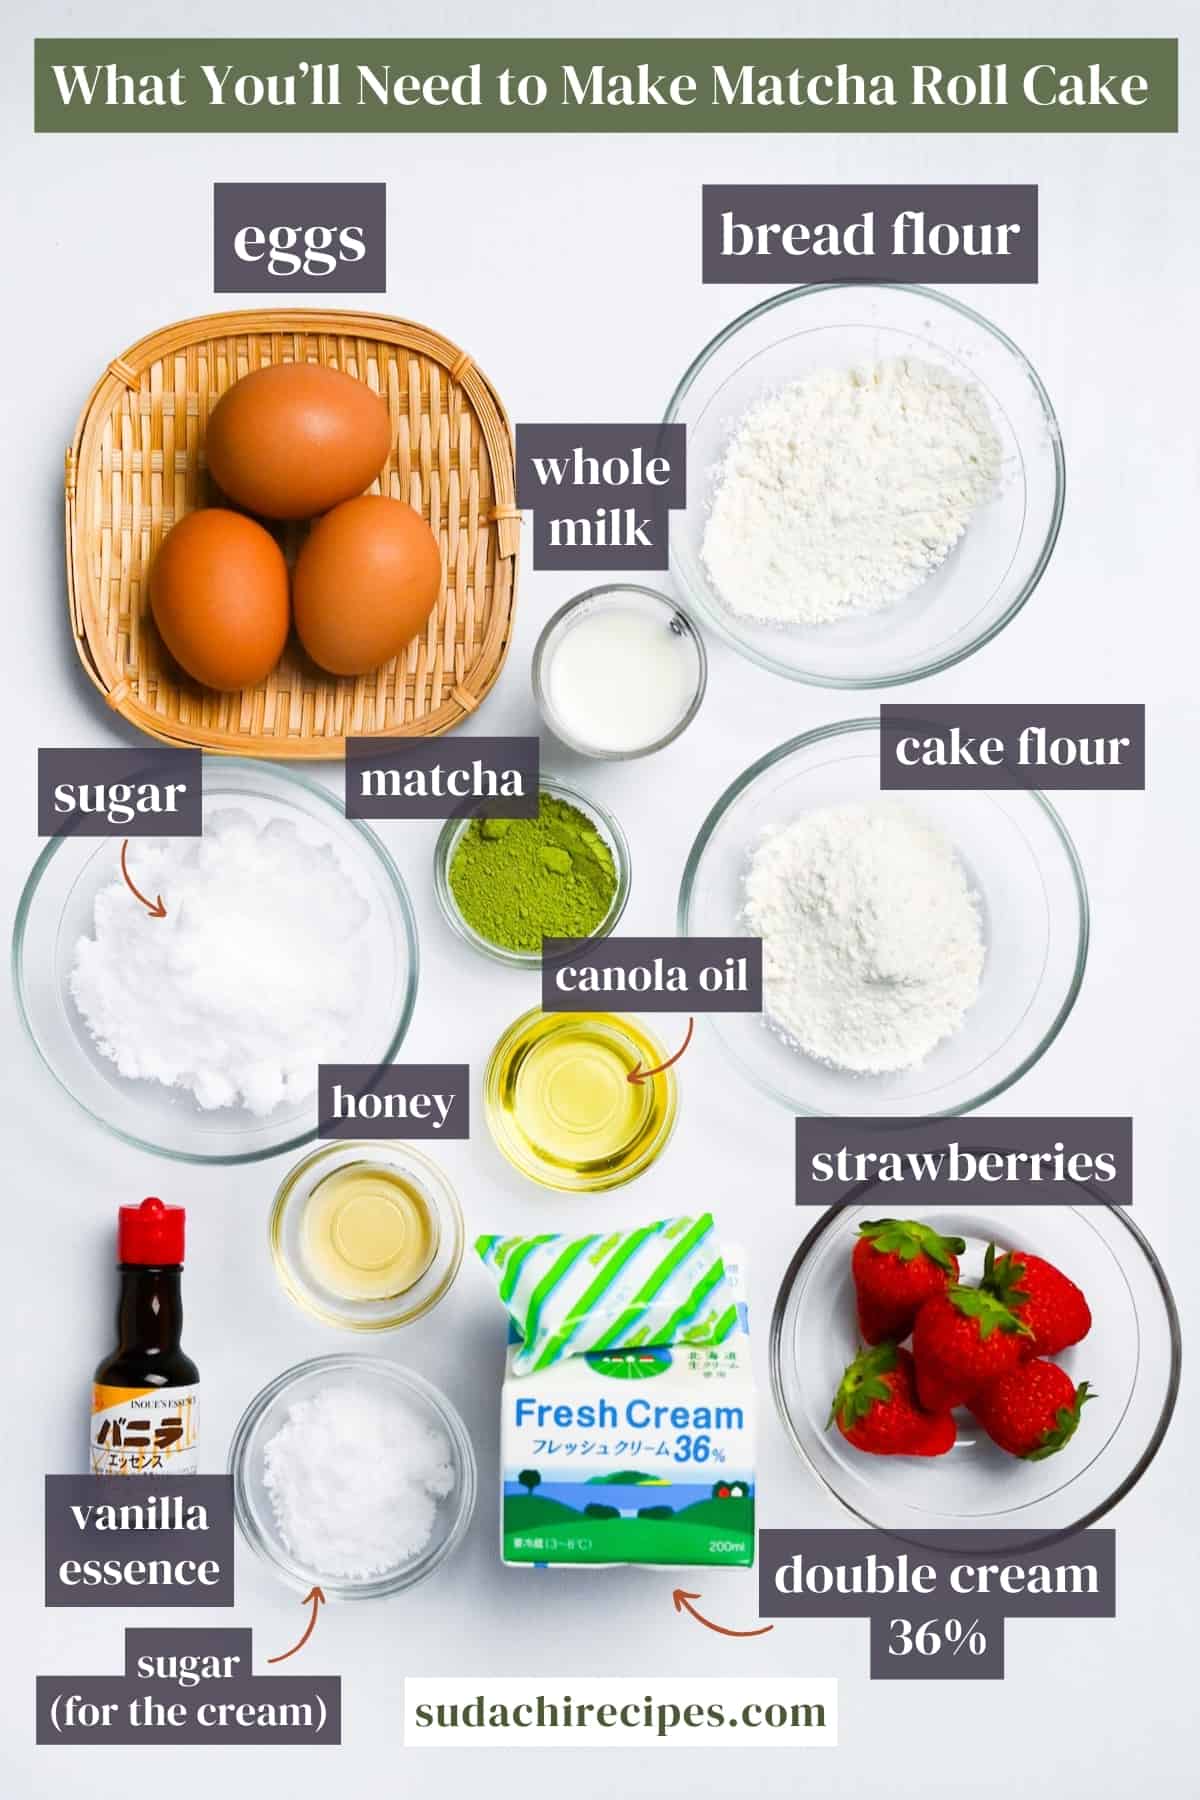 Ingredients needed to make Japanese Matcha Roll Cake (Green Tea Swiss Roll)